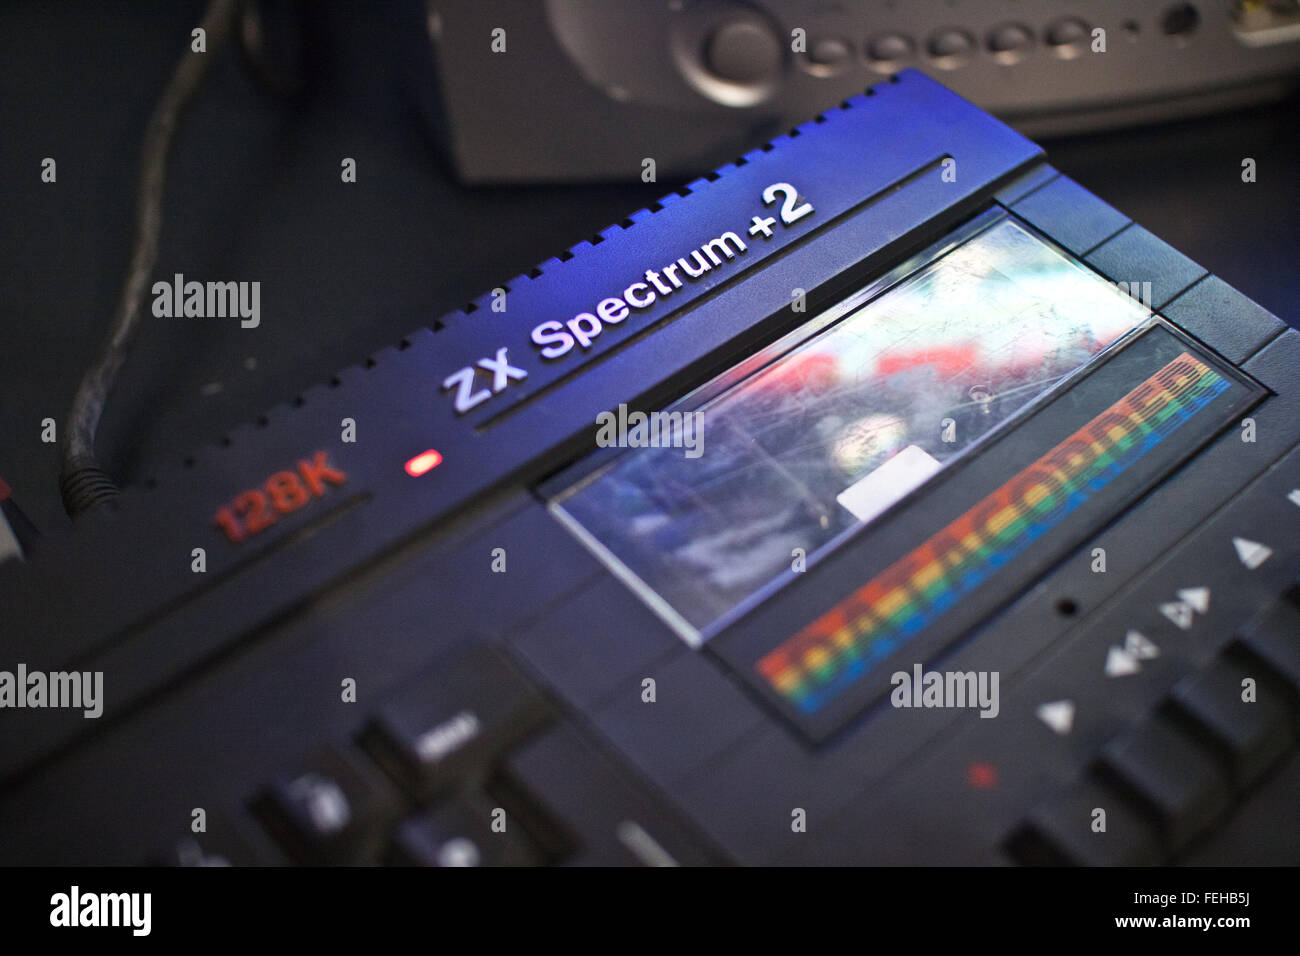 Detail of ZX Spectrum +2 on display at Eurogamer expo. Stock Photo